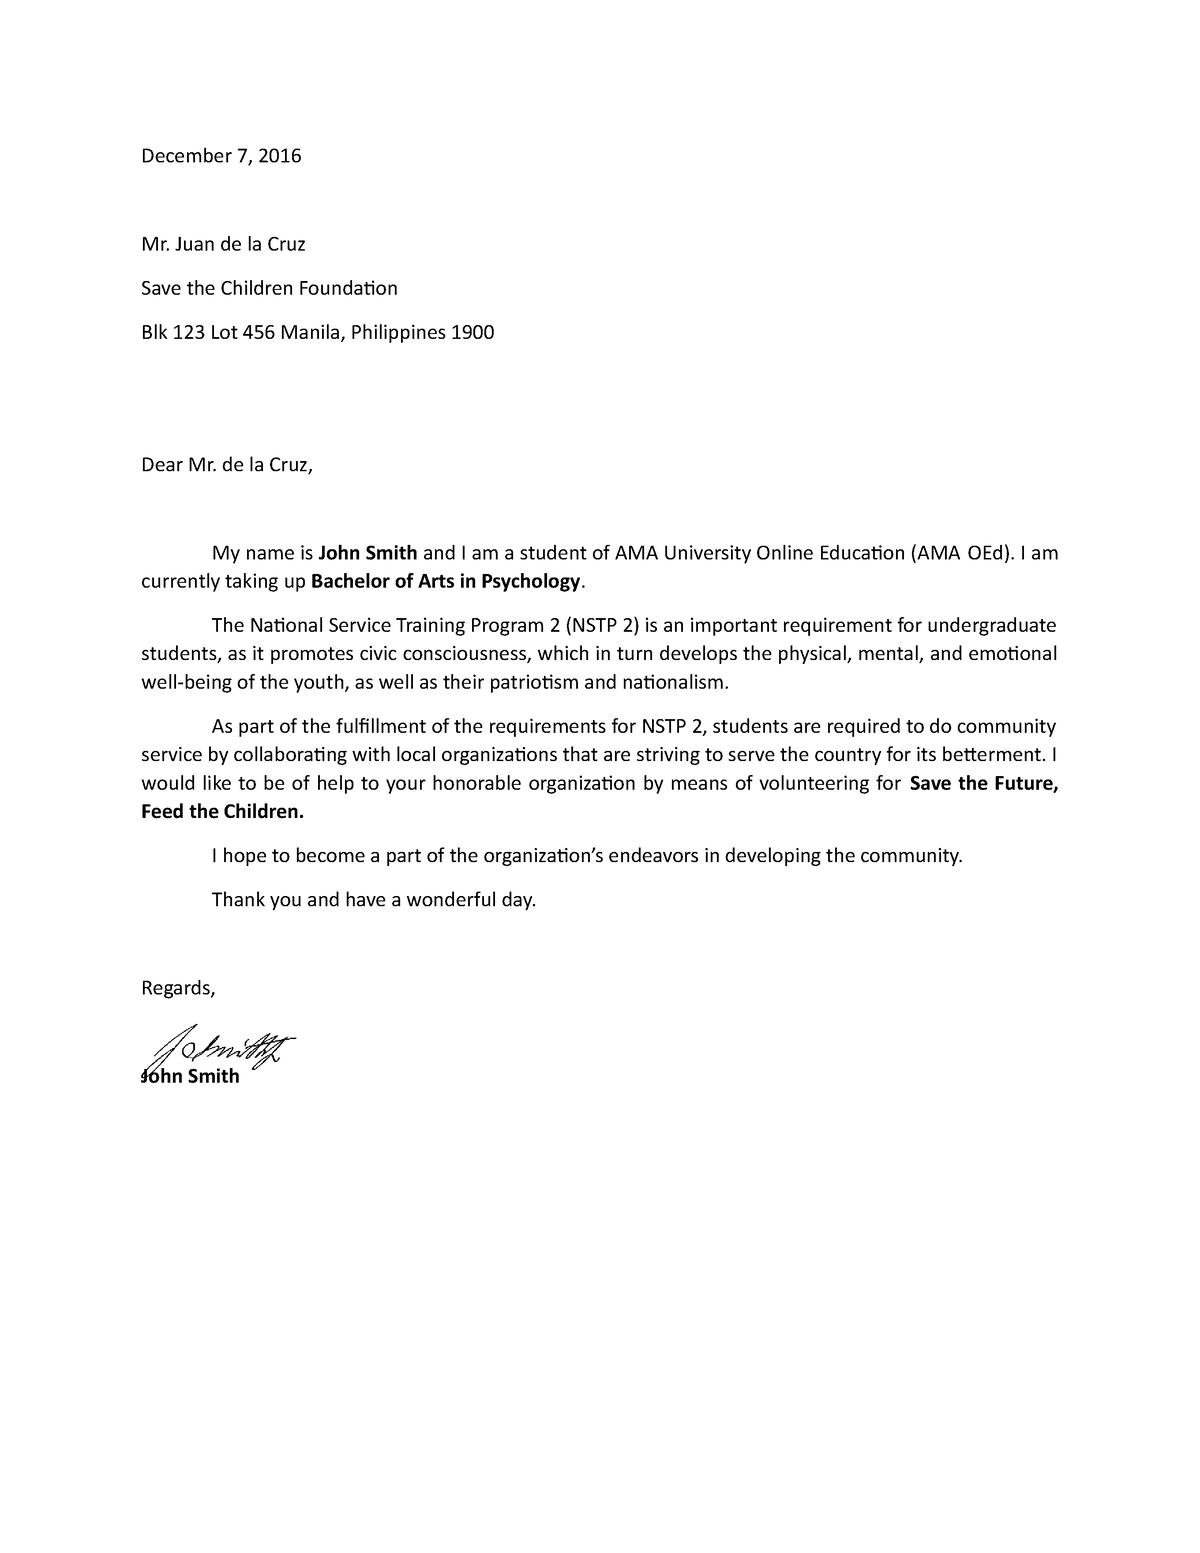 application letter to attend training course